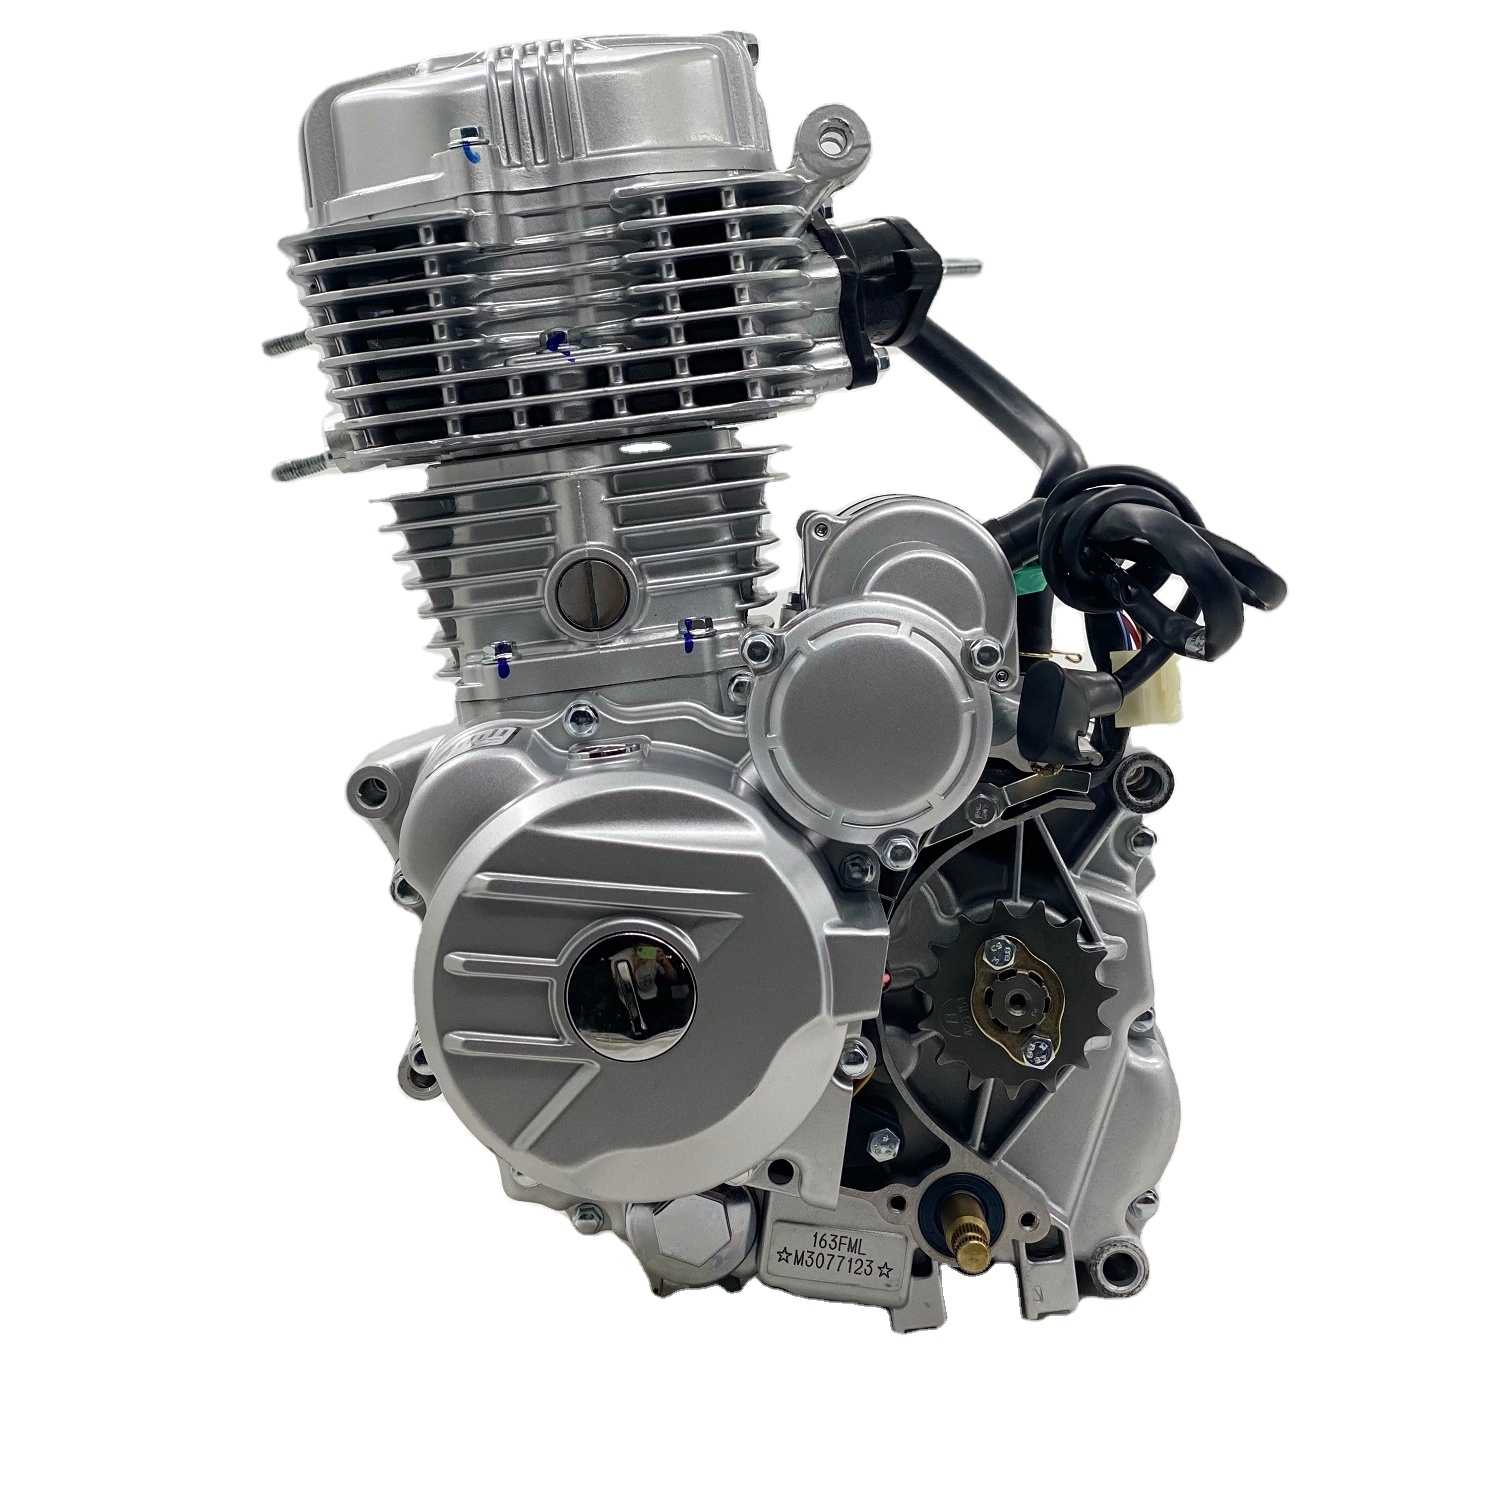 DAYANG factory 4 Valves Engine air Cooled 250cc Engine For All Motorcycles With Complete Engine Kit Powerful